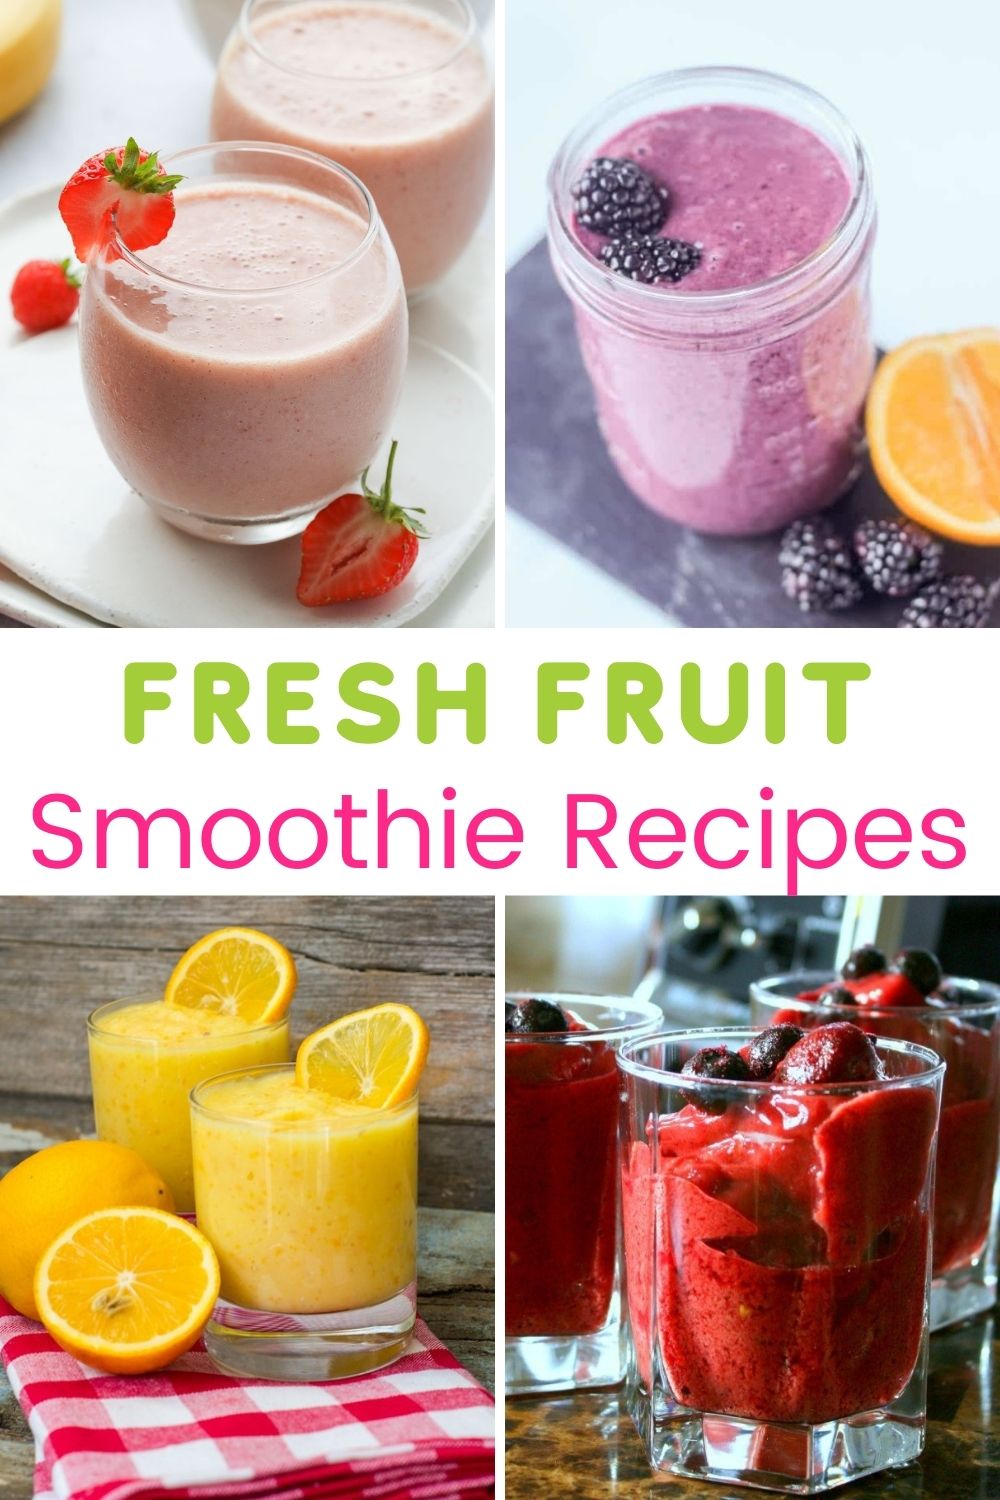 12 of the Most Delicious Fresh Fruit Smoothie Recipes You'll LOVE!